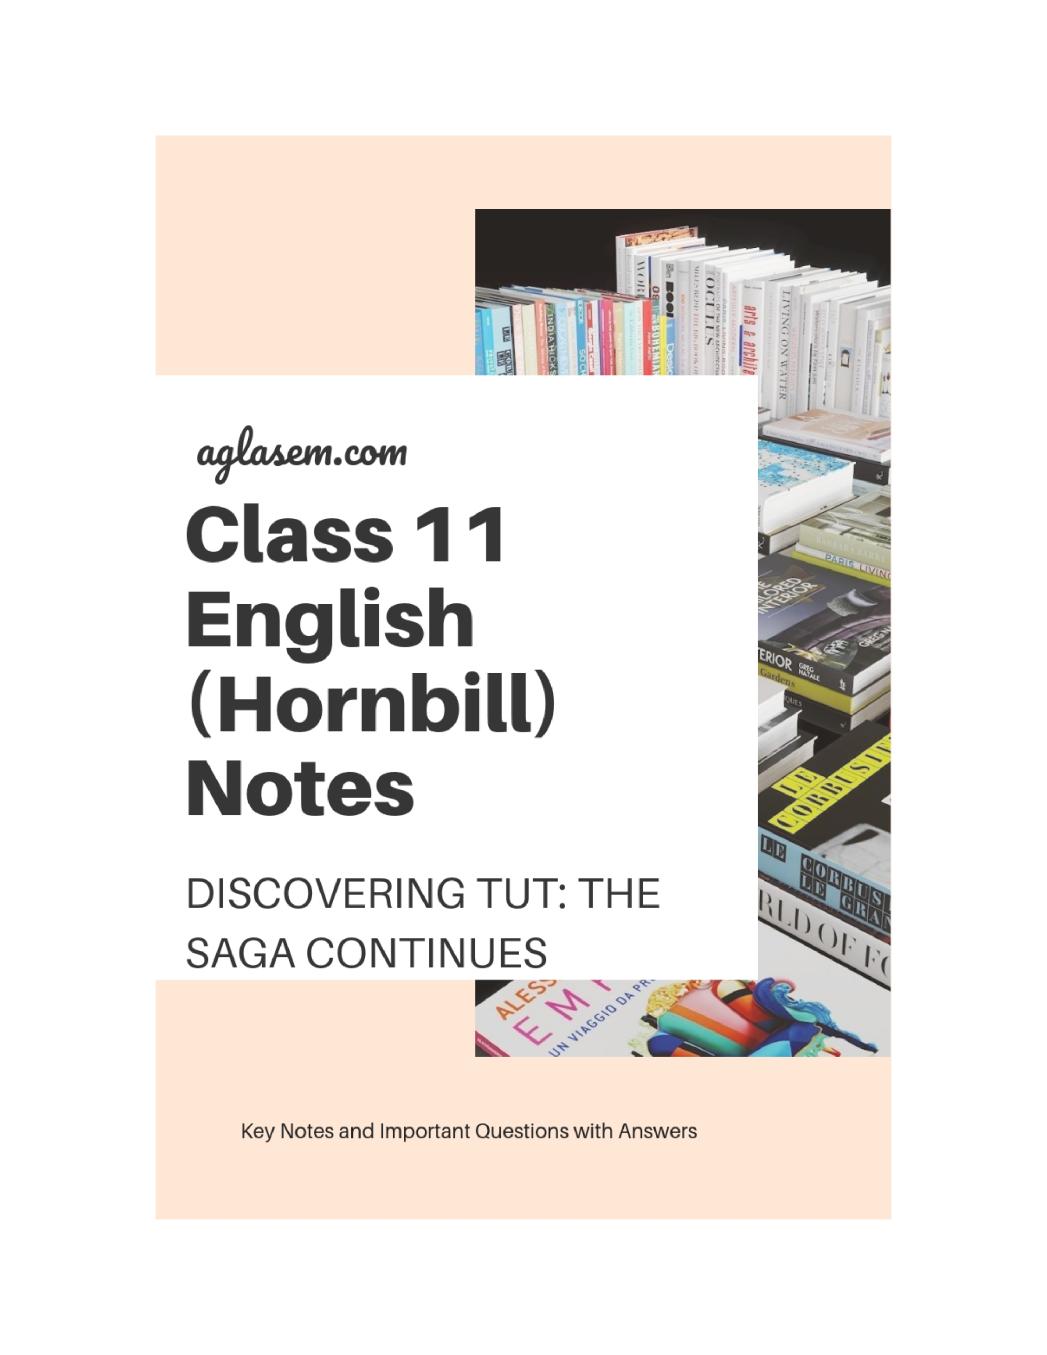 Class 11 English Hornbill Notes For Discovering Tut The Saga Continues - Page 1